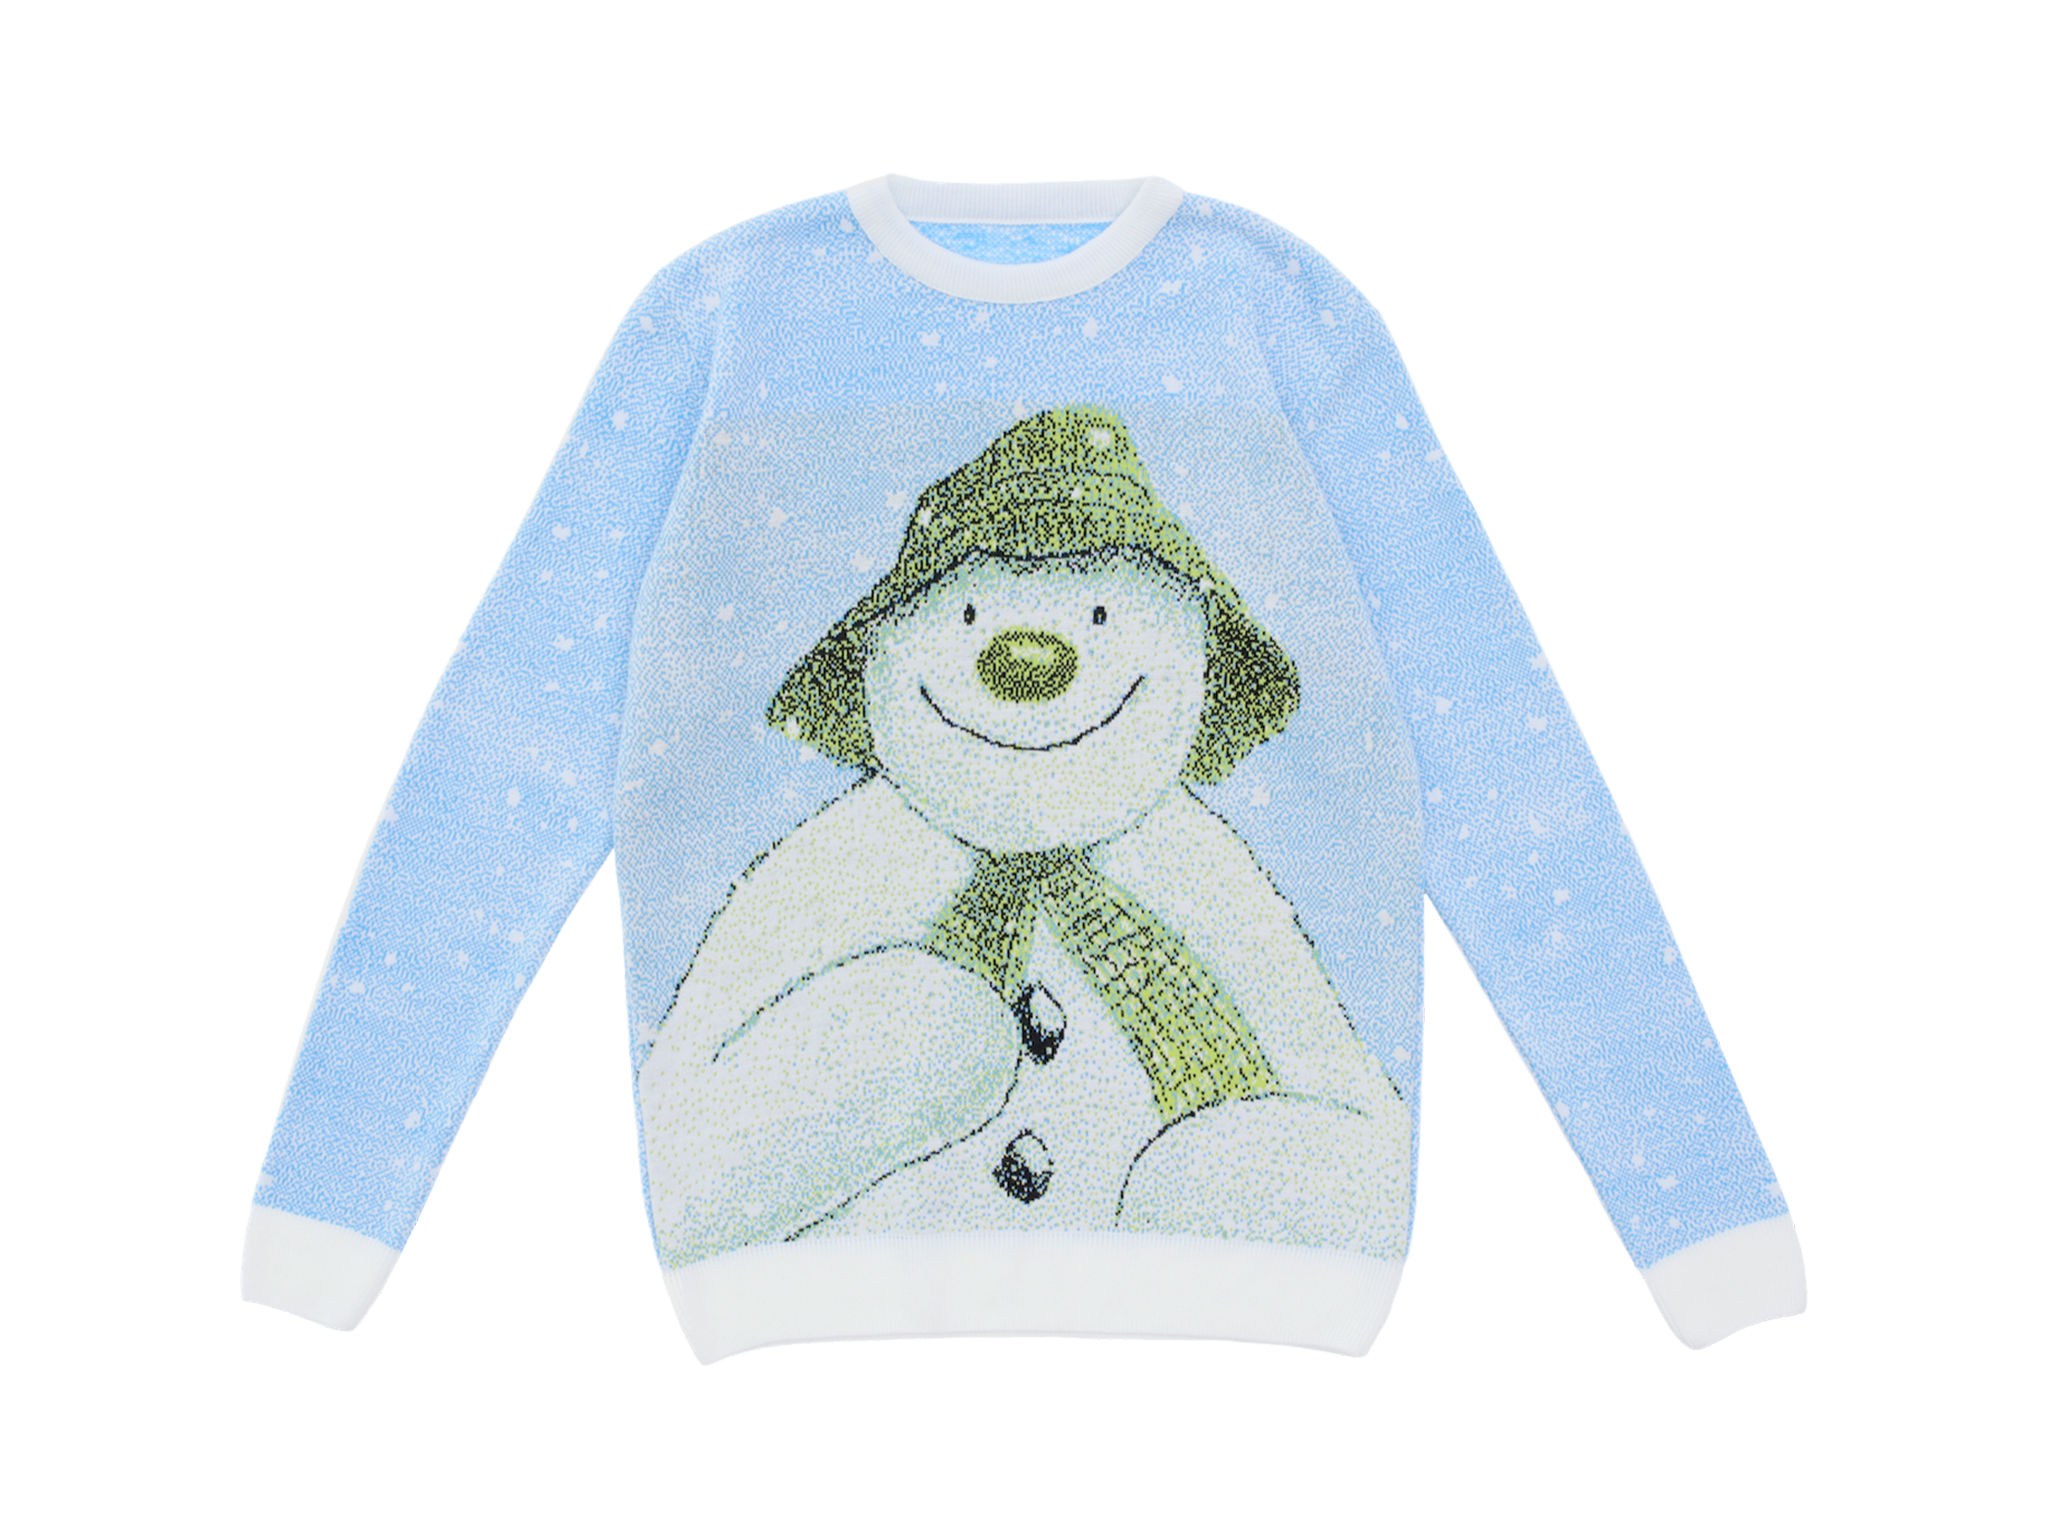 Christmas jumpers 2022: The best festive knits to wear reviewed